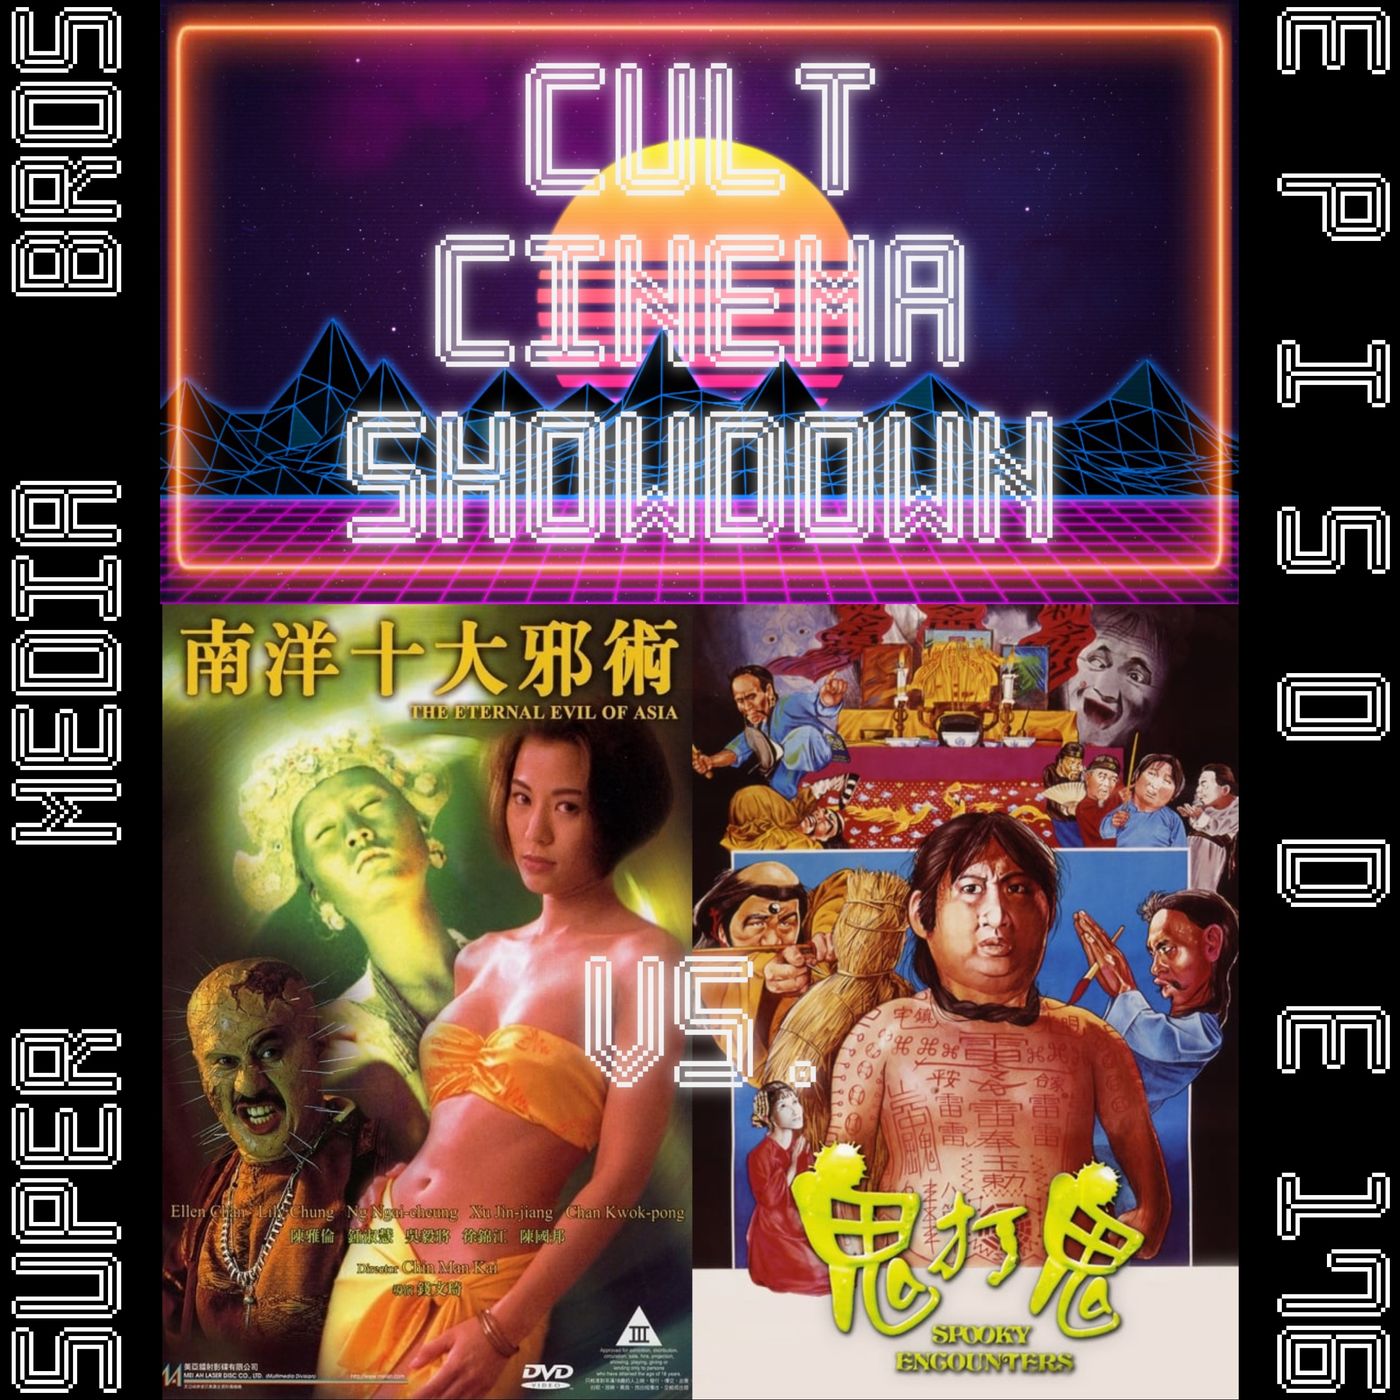 Cult Cinema Showdown 75: The Eternal Evil of Asia vs Encounters of the Spooky Kind (Ep. 176) Image